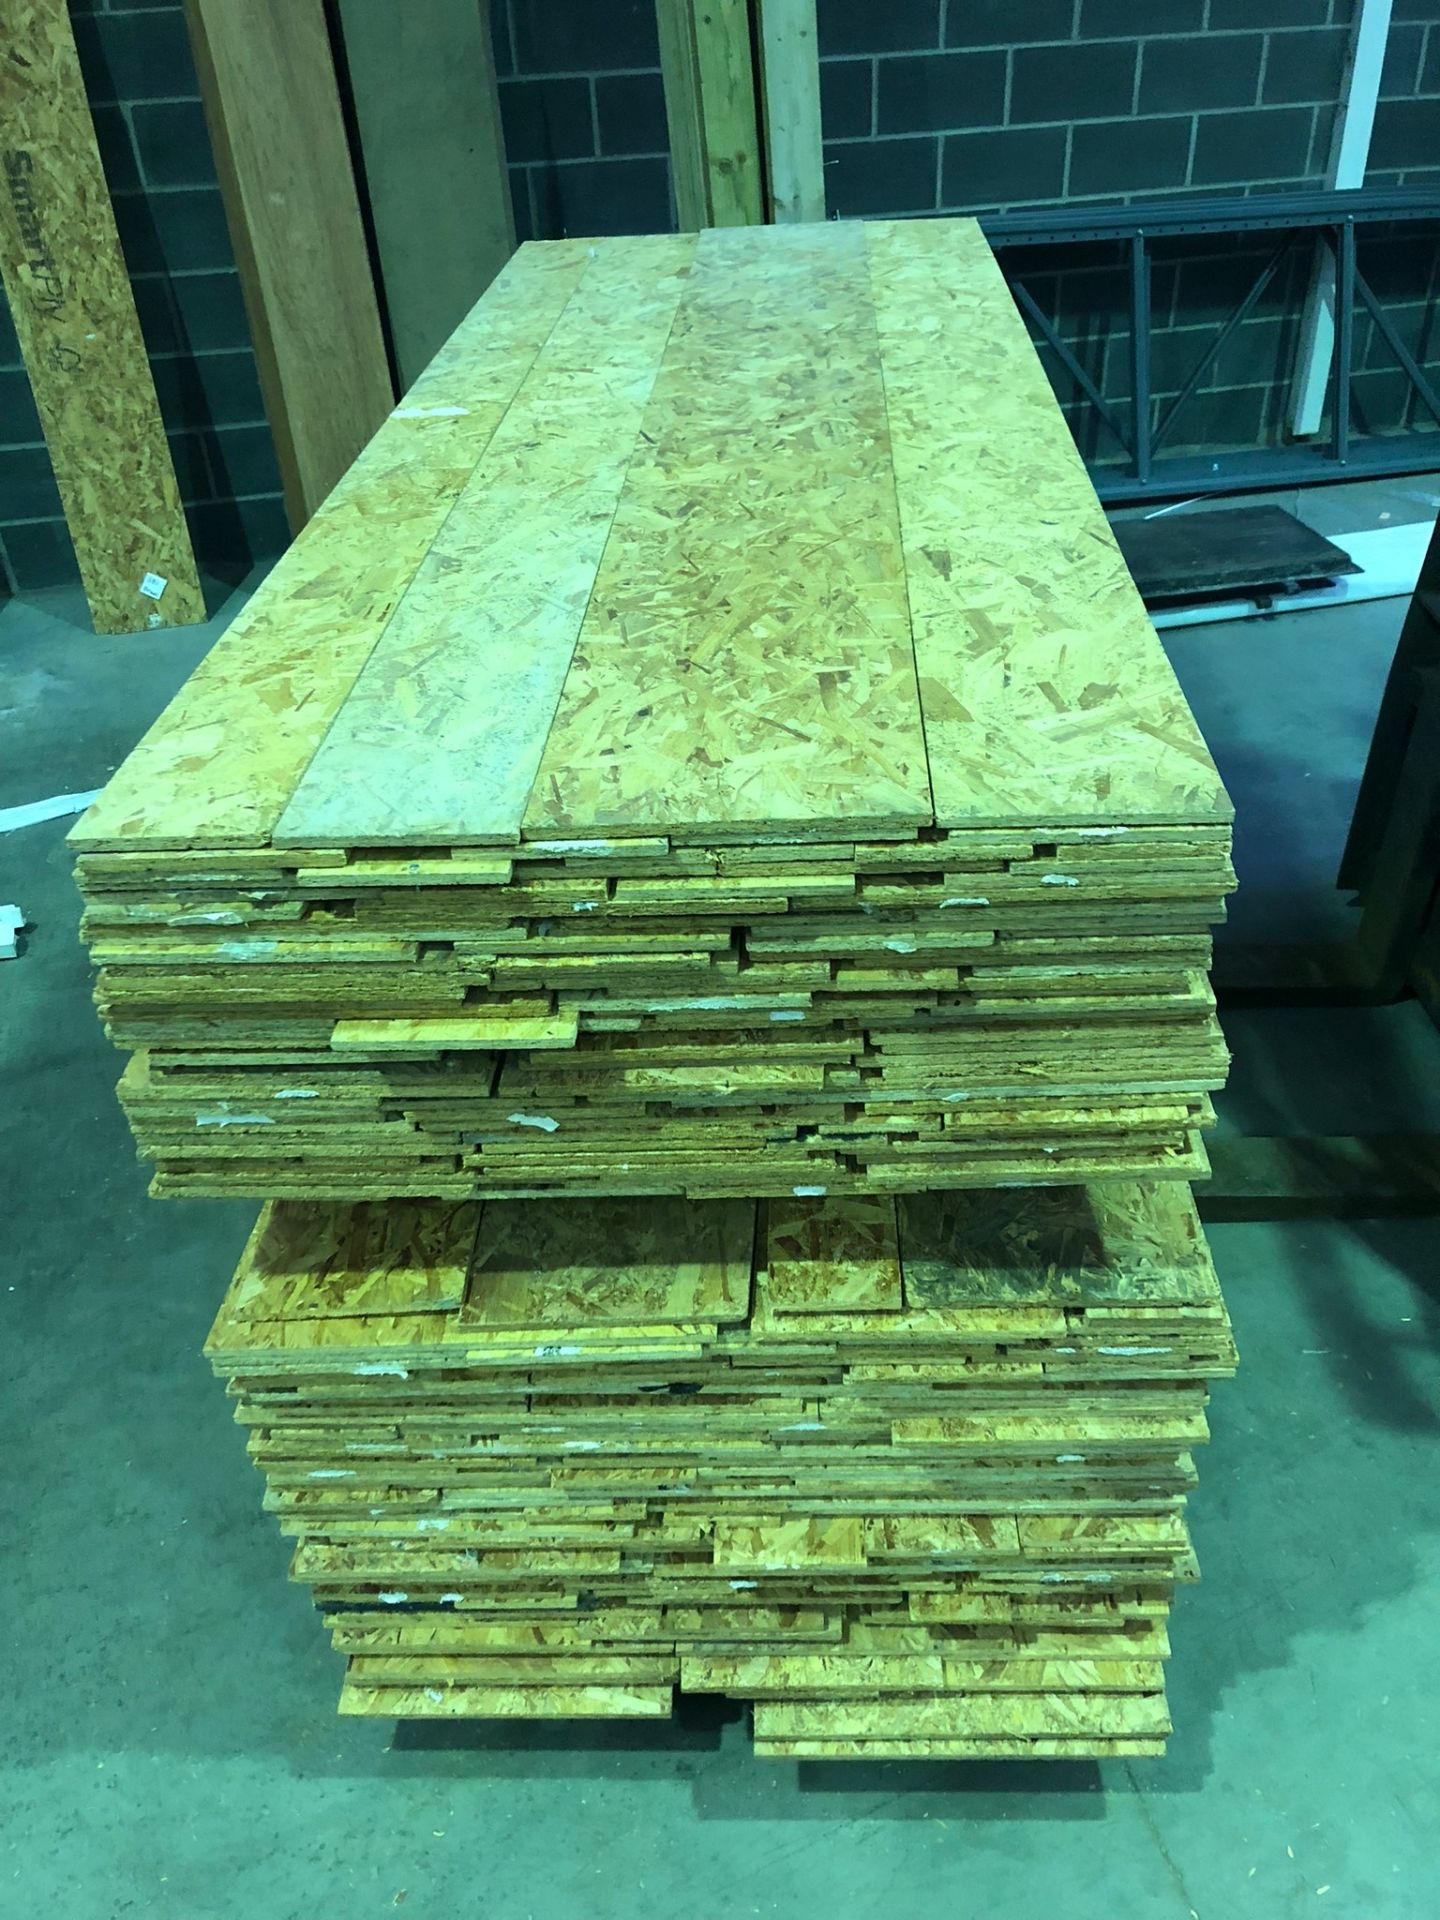 2 PALLETS OF 12MM OSB BOARD PLYWOOD RIPS BETWEEN 6INCH - 20INCH - 96 FULL SHEETS WORTH APPROX - Image 6 of 7